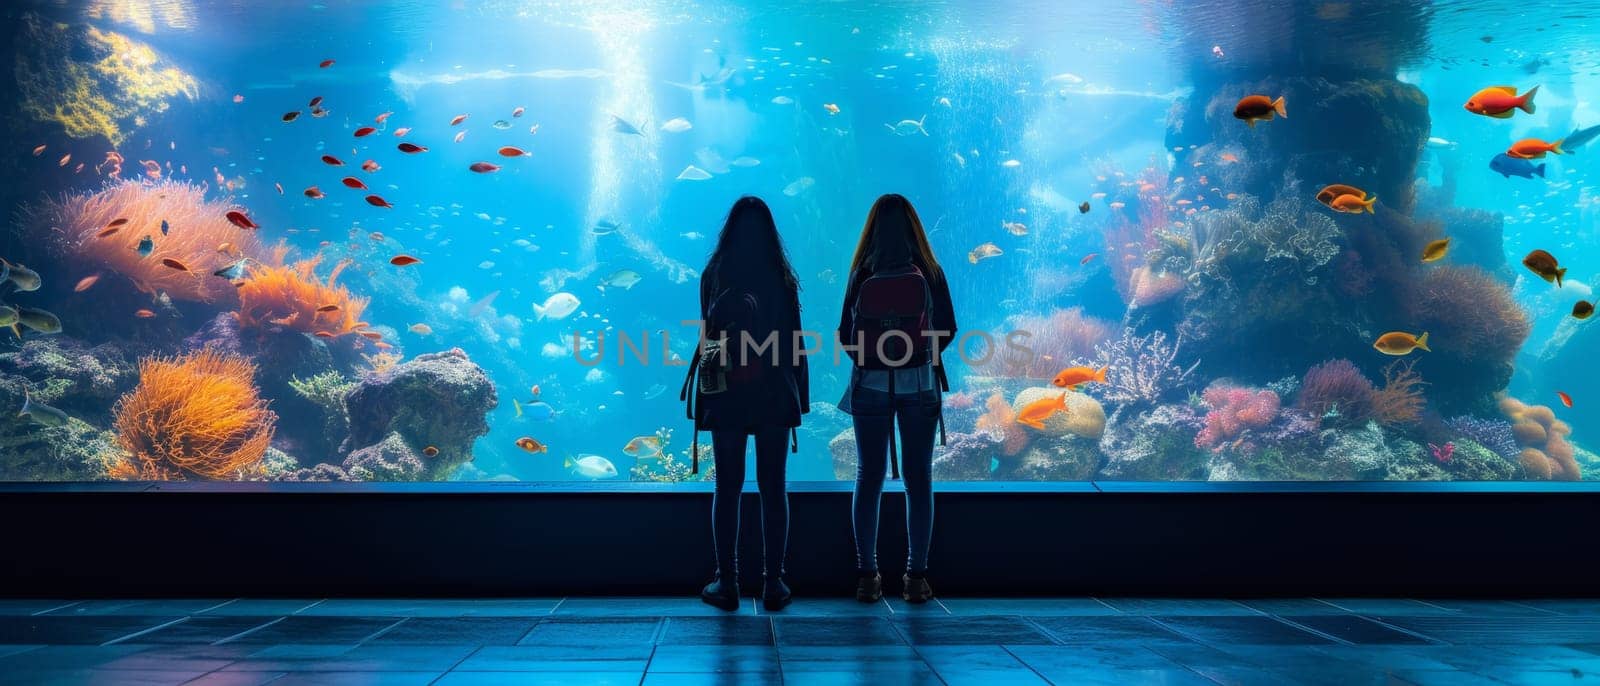 Two people observing a vibrant, colorful underwater scene at an aquarium